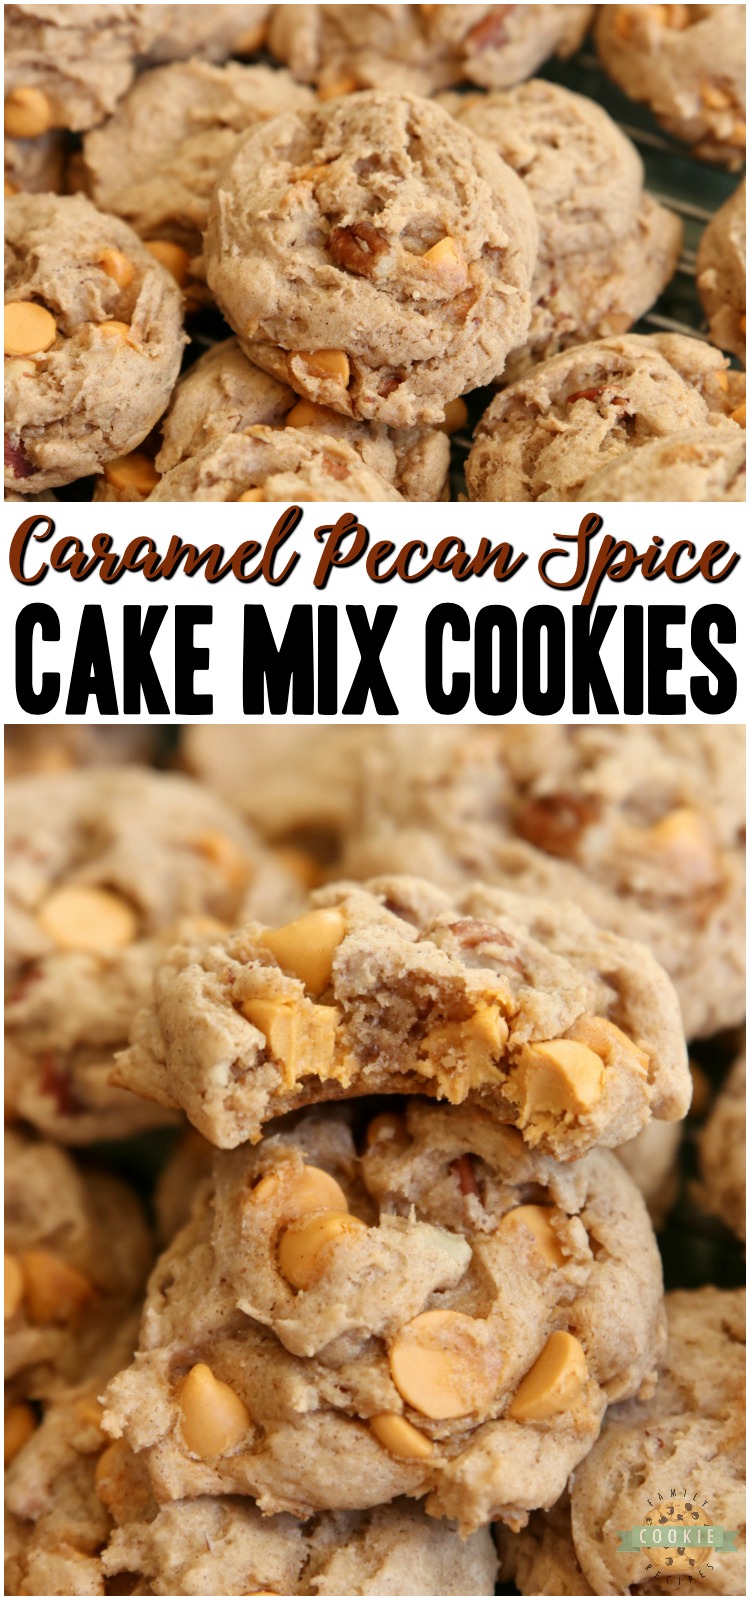 Caramel Spice Cake Mix Cookies made with just 5 ingredients! Soft & chewy spiced cookies with crunchy pecans and sweet caramel baking chips. Perfect Fall cookie recipe! #cookies #spicecakemix #cakemix #caramel #pecan #baking #dessert #recipe from FAMILY COOKIE RECIPES